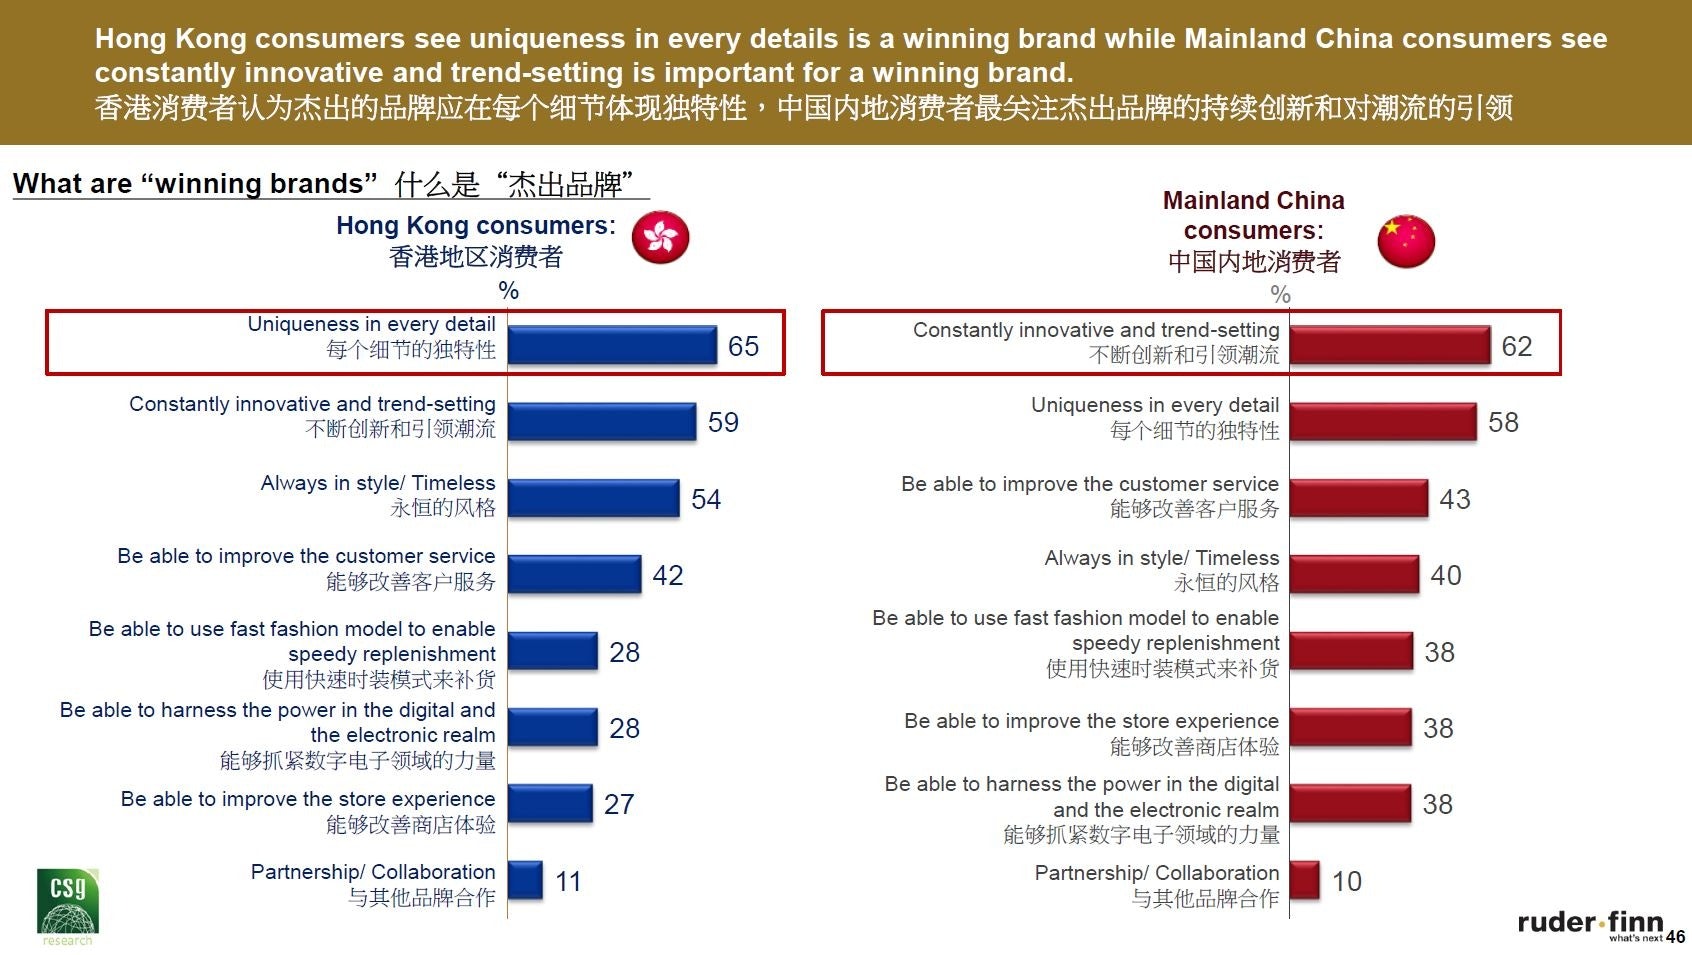 Factors that identify "winning" brands are different to mainland Chinese and Hong Kong consumers. Hong Kong consumers see uniqueness in every detail as a winning brand while mainland China consumers see constant innovation and trend-setting as important for a winning brand.